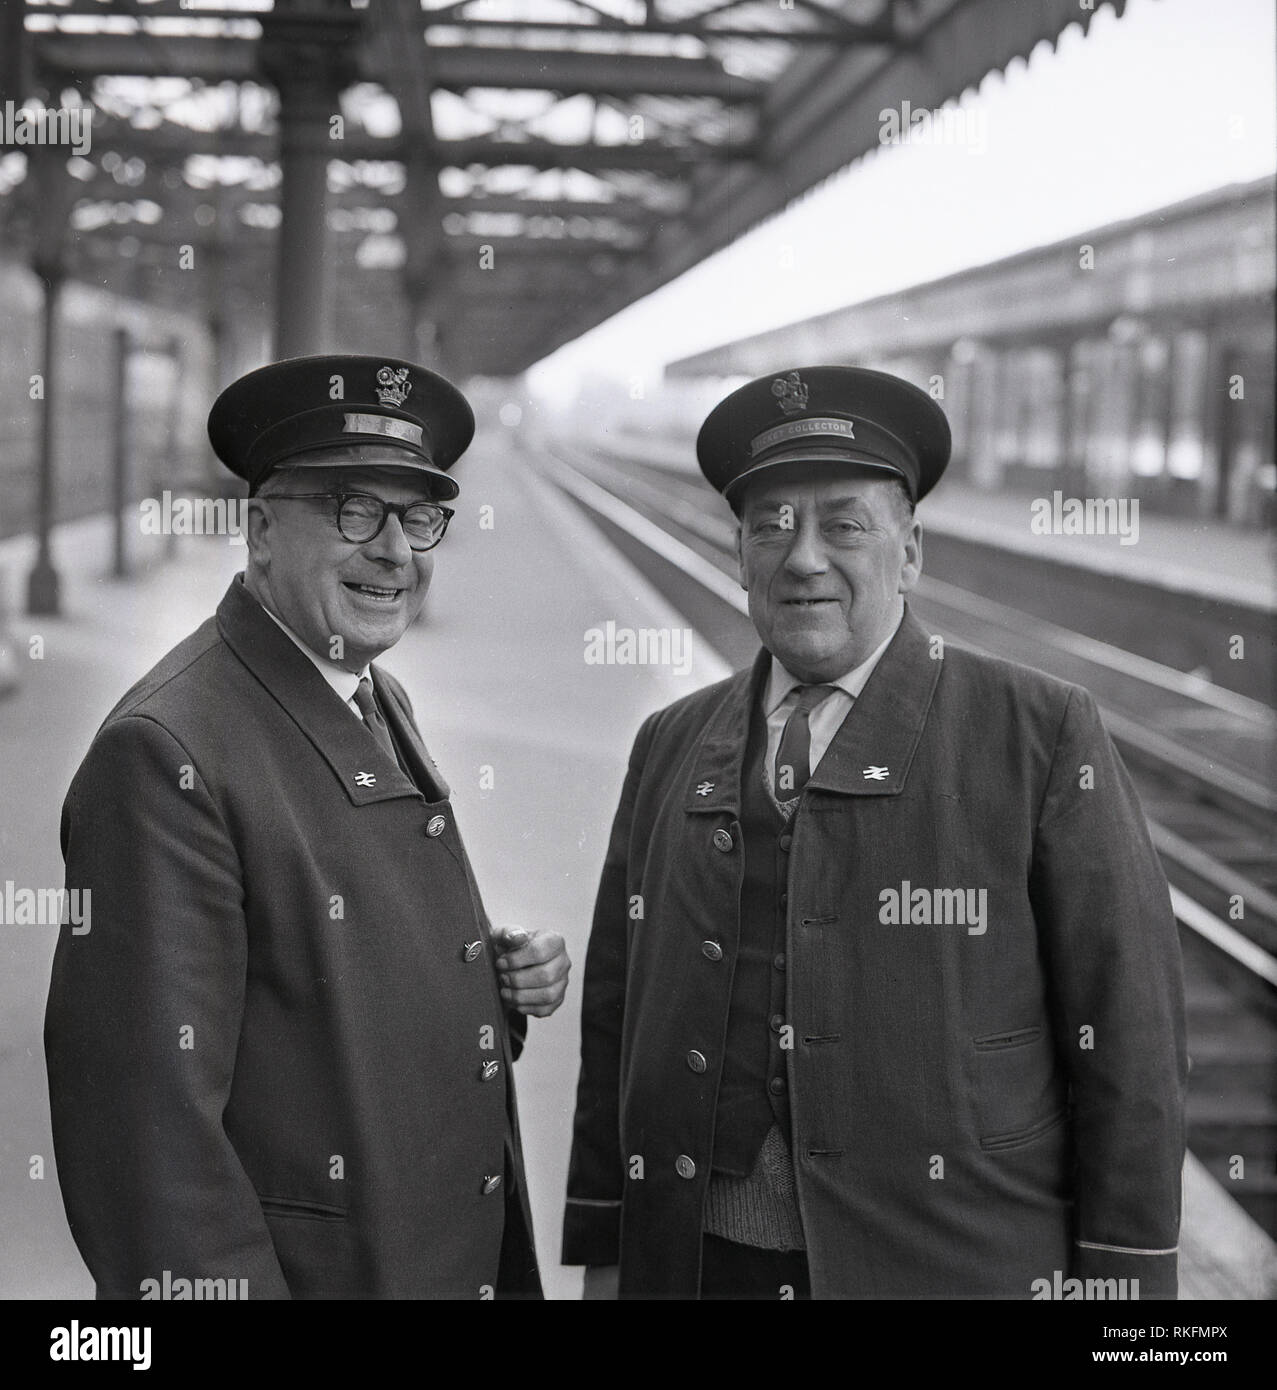 1968, picture shows two cheerful uniformed British Rail staff, a station foreman and ticket collector standing together on the platform at Blackheath railway station, Blackheath, London, England, UK. Stock Photo